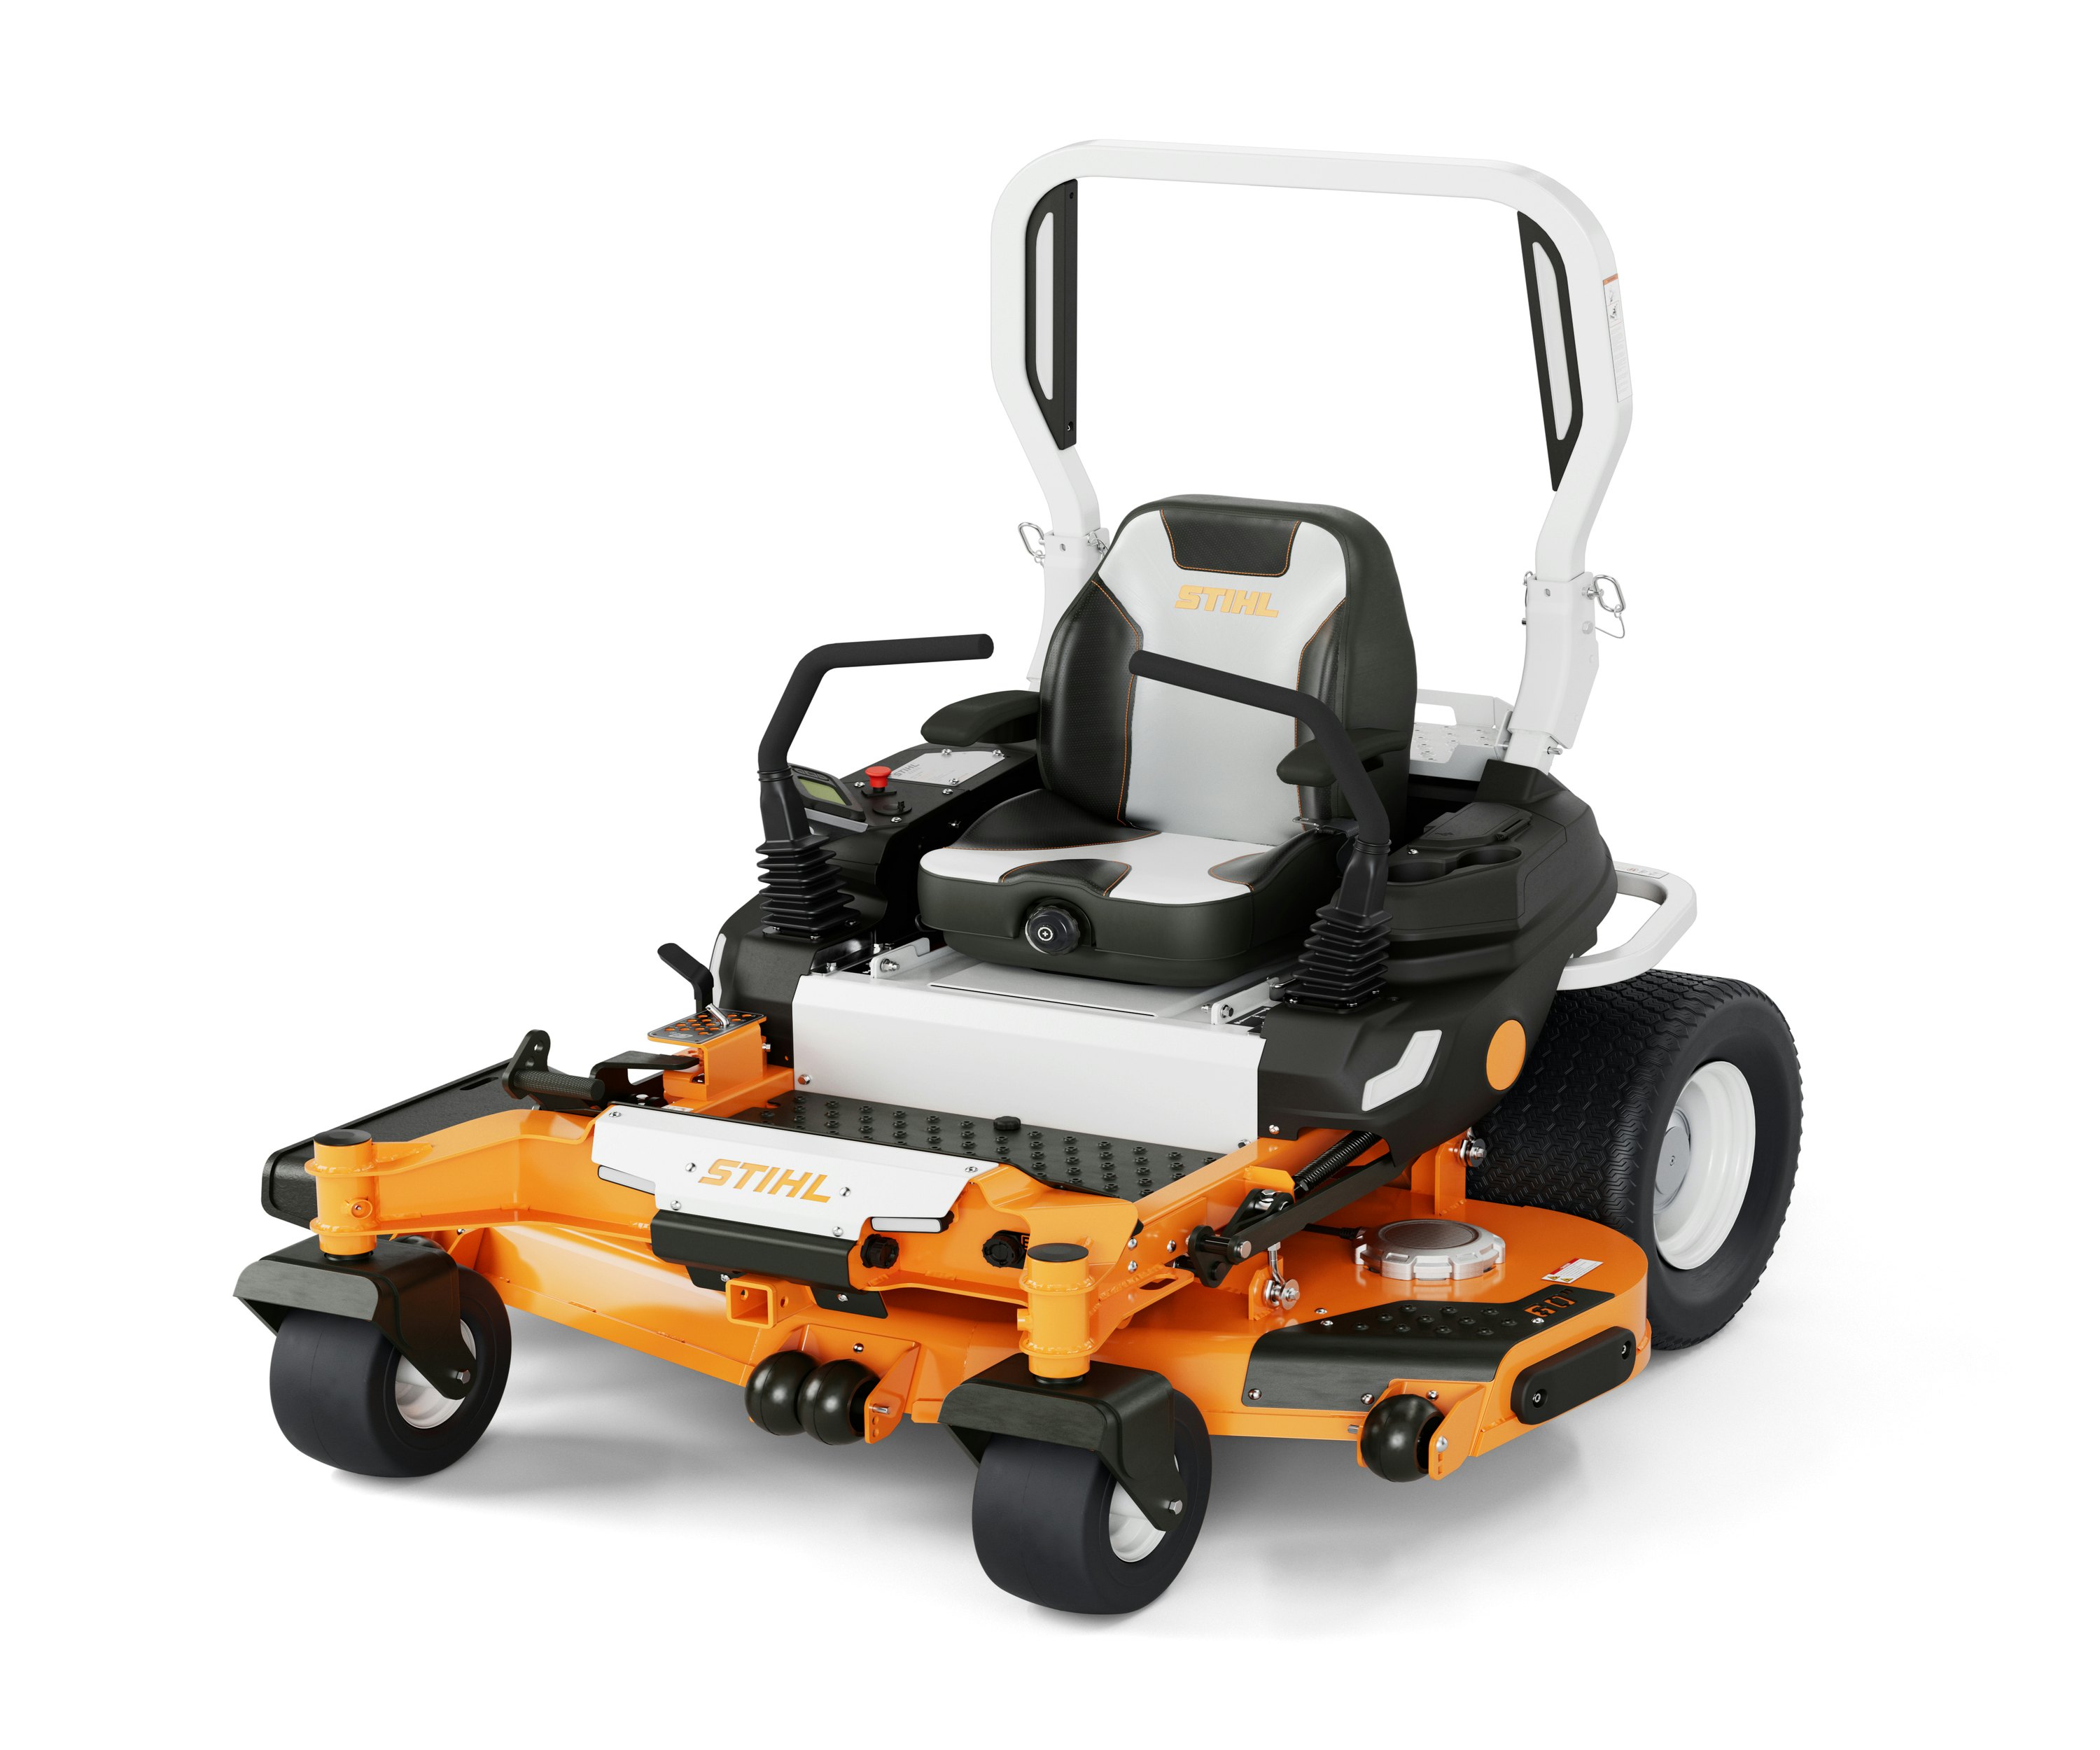 Stihl Intros New Mowers, Trimmers and More at Equip Expo 2023 From